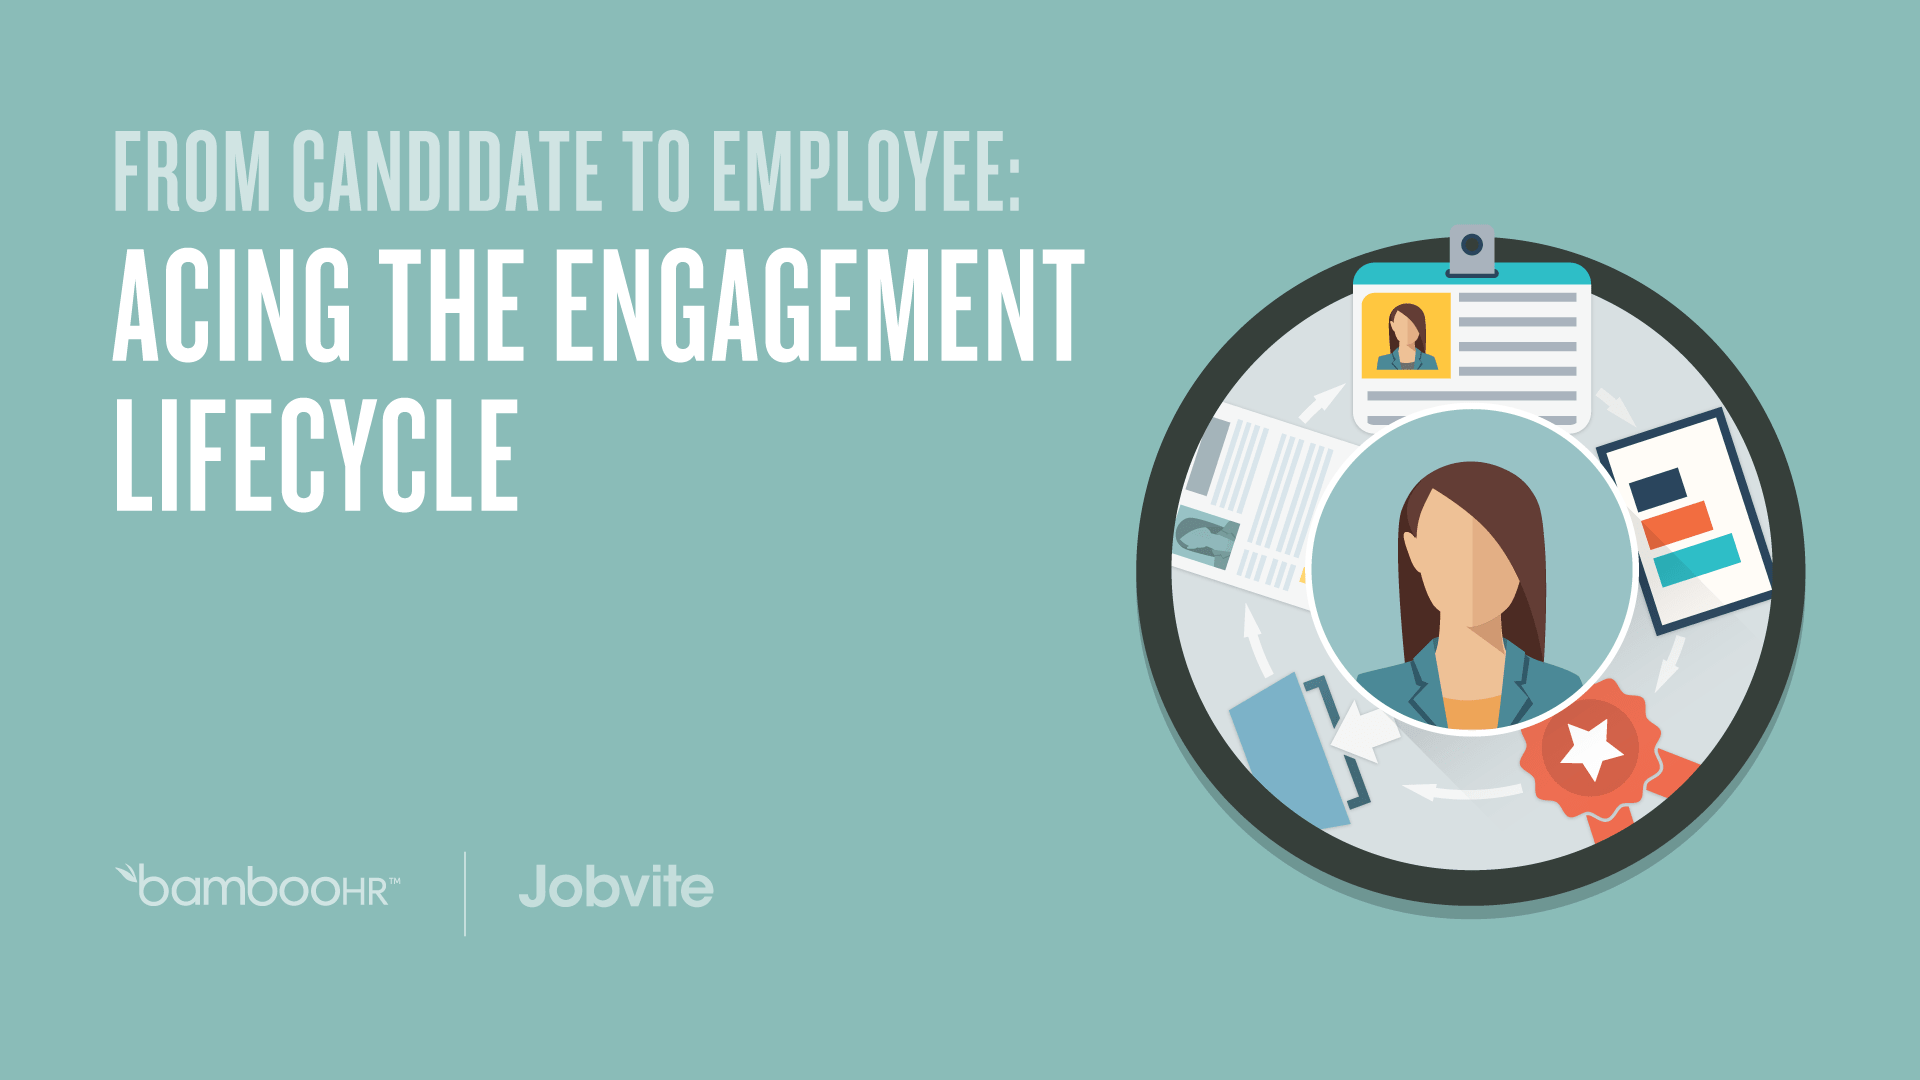 From Candidate to Employee: Acing the Engagement Lifecycle